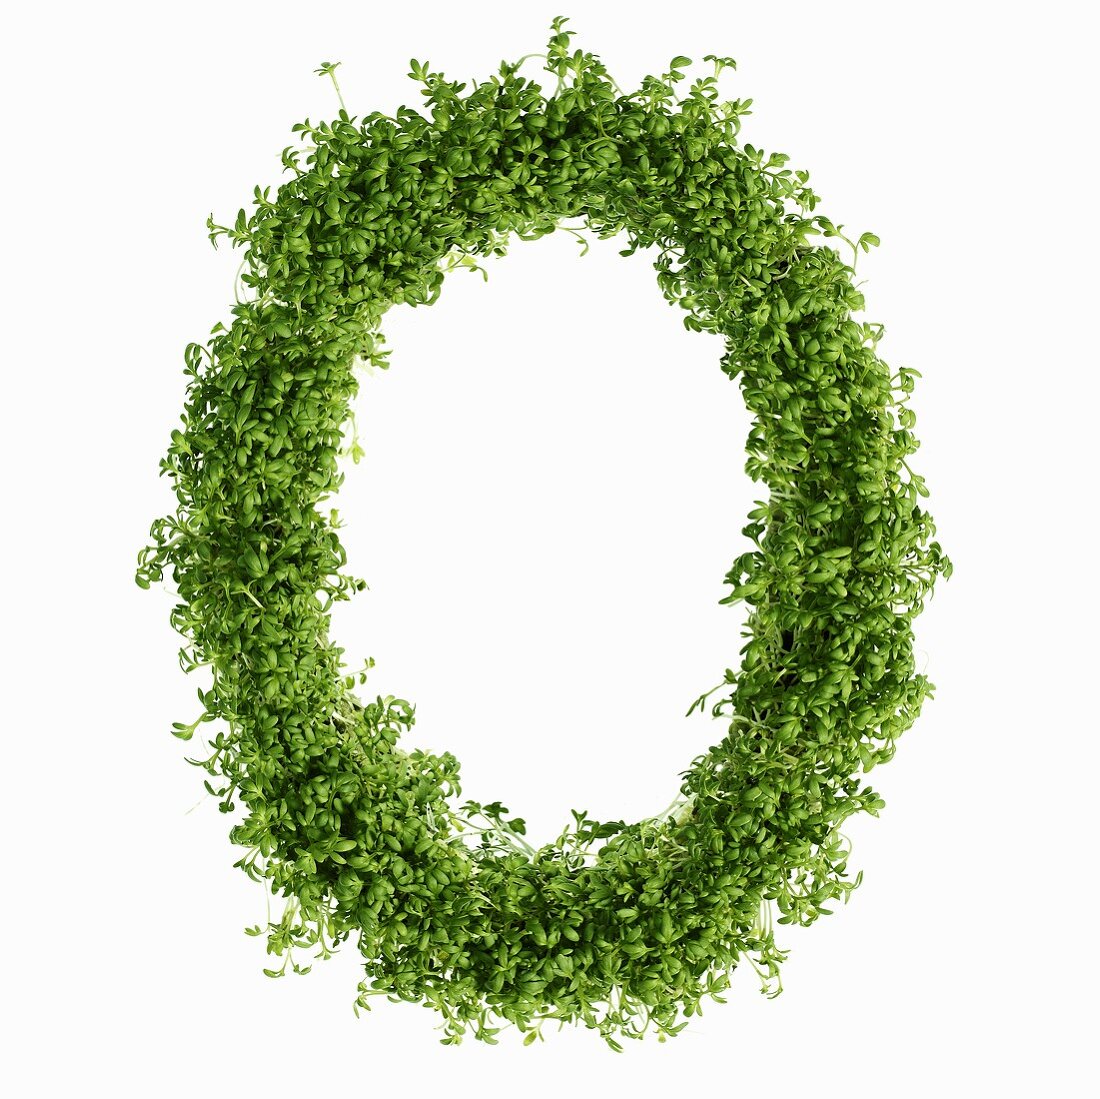 The letter O in cress